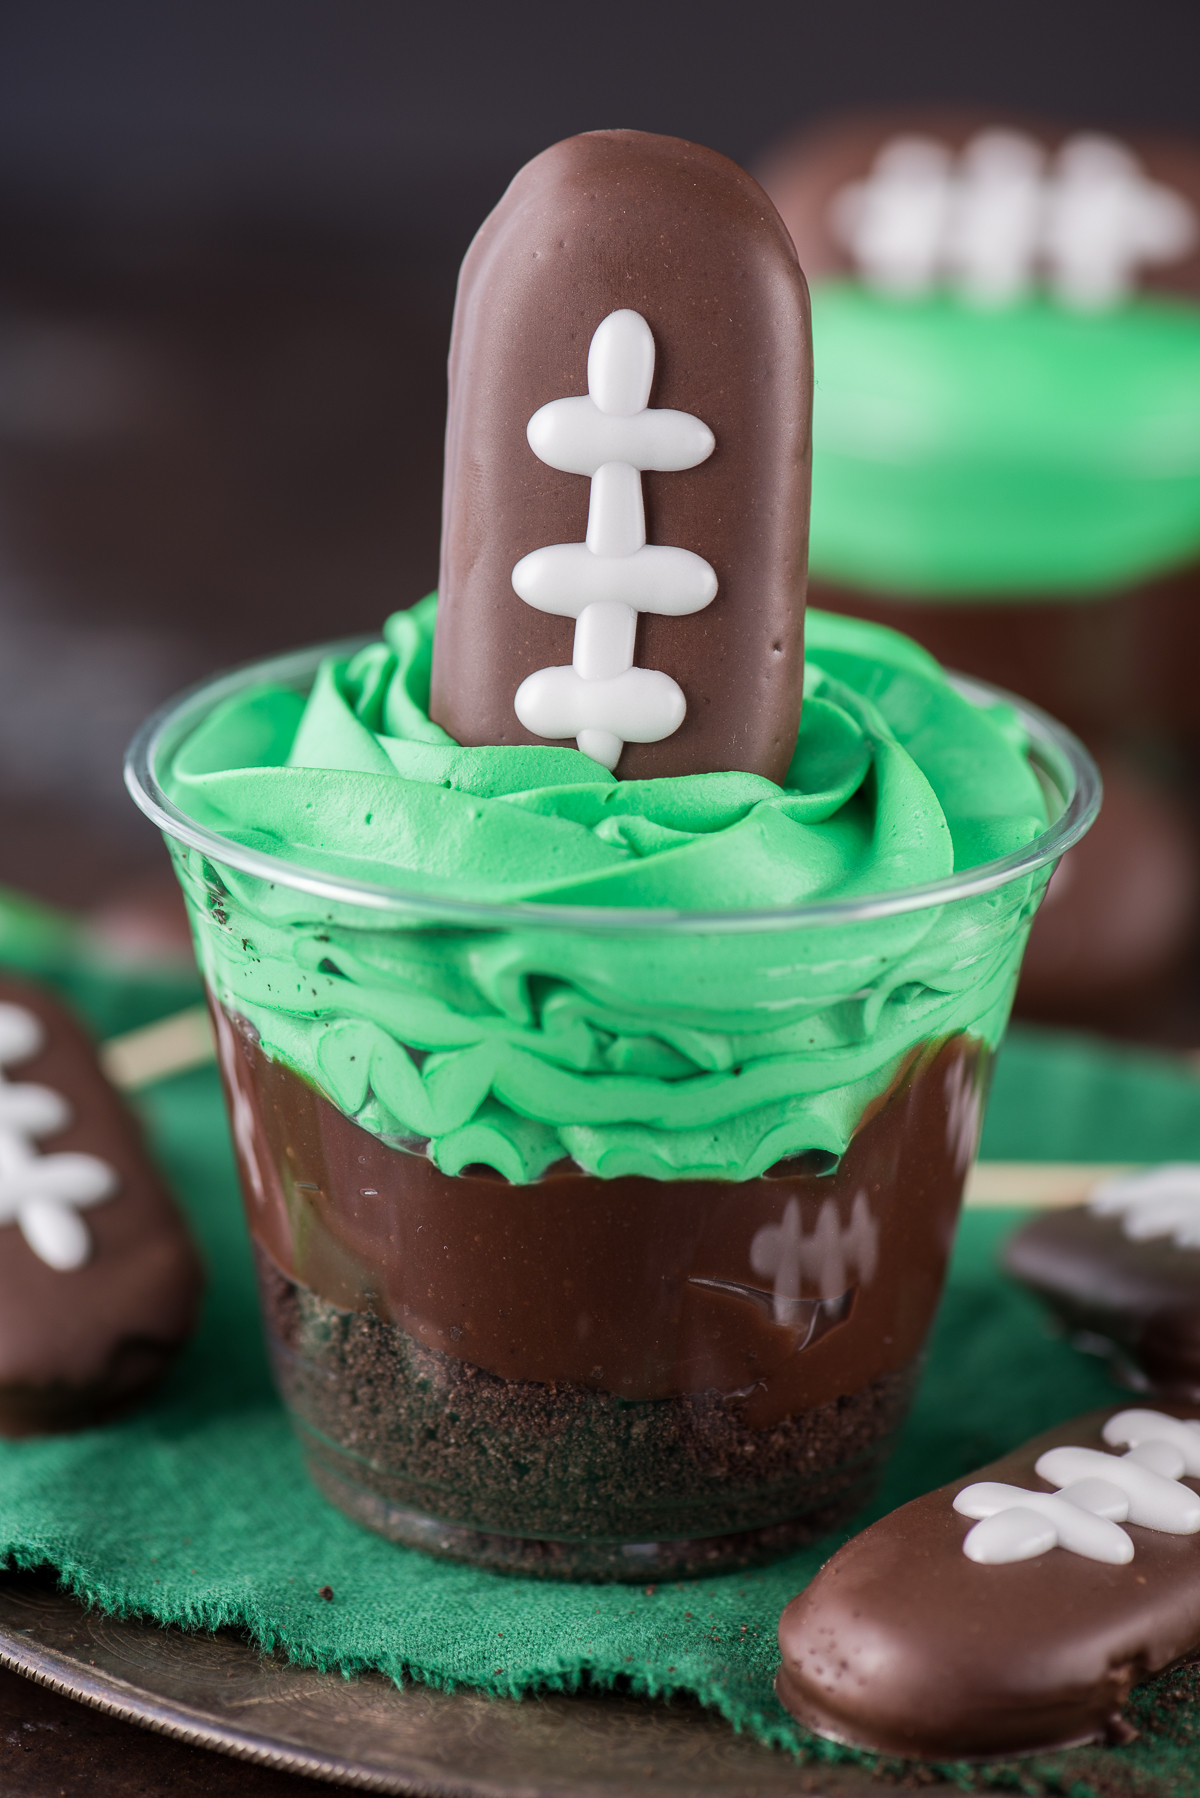 Super Bowl Theme Desserts
 13 Football Shaped Desserts for an Awesome Super Bowl Party